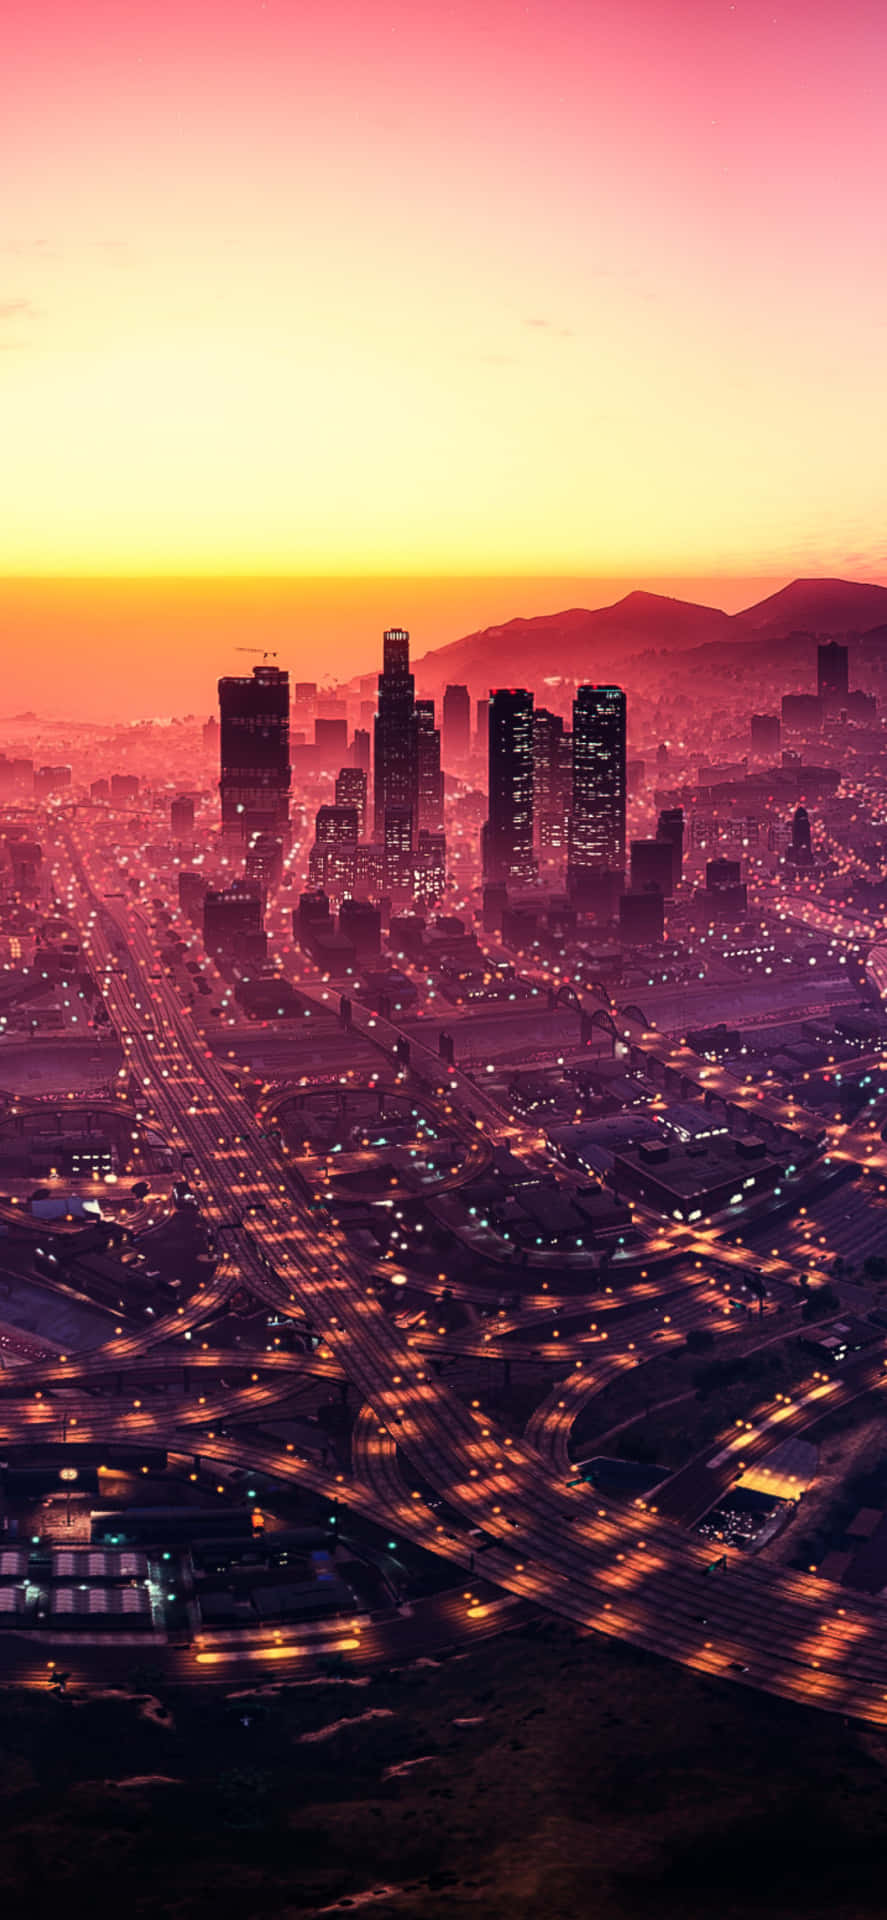 Iphone Xs Max Grand Theft Auto V Background Los Santos Filled With Lights